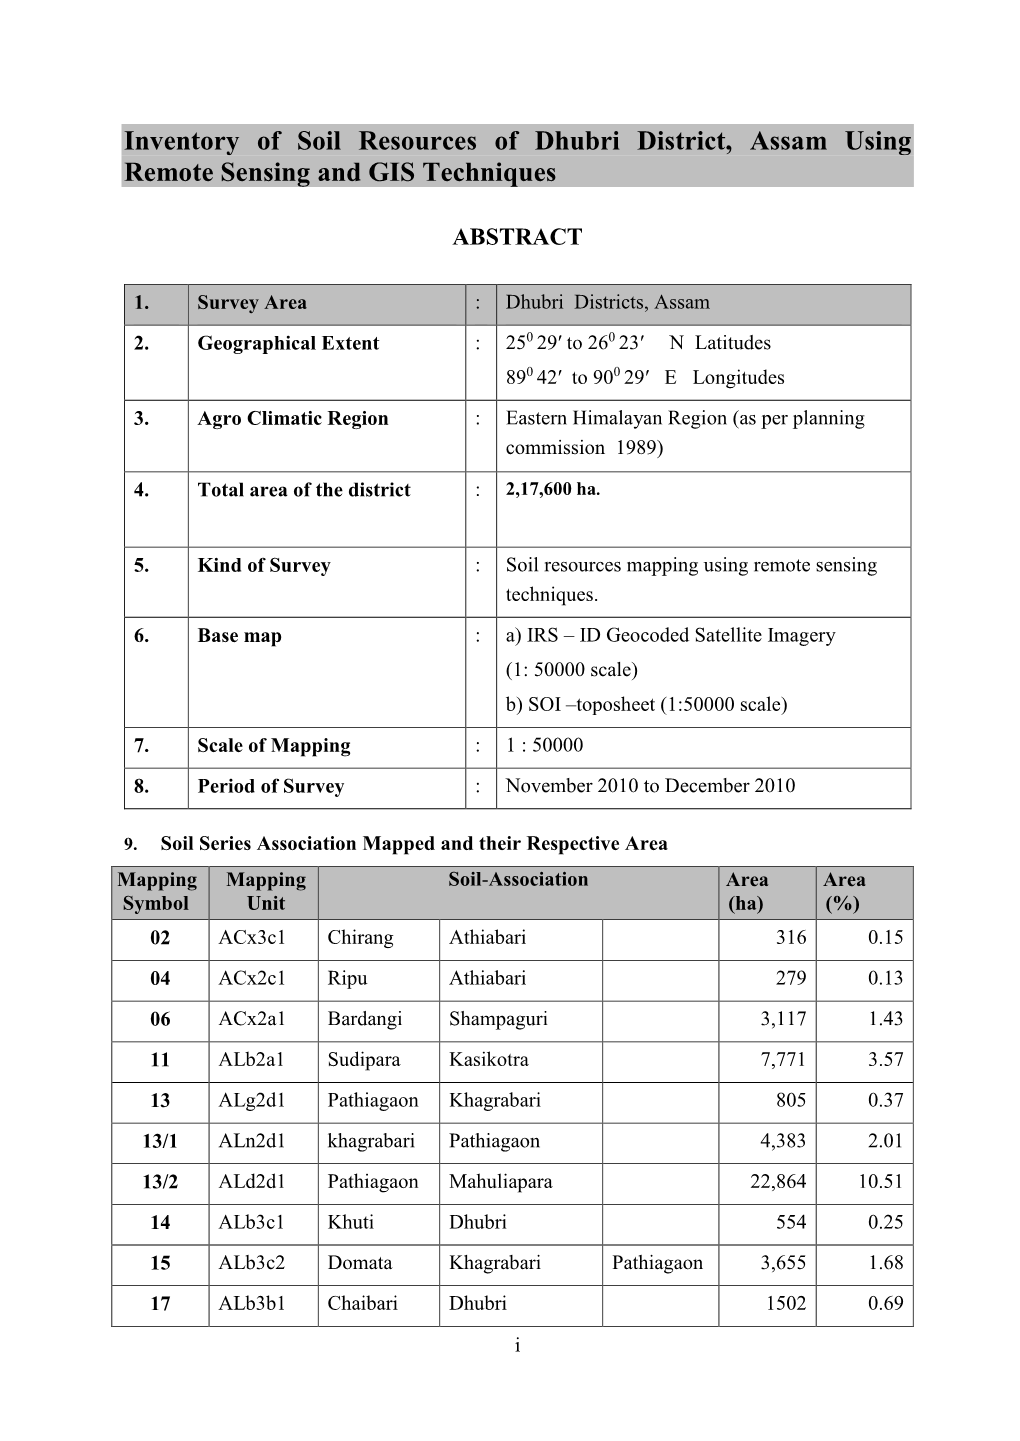 Inventory of Soil Resources of Dhubri District, Assam Using Remote Sensing and GIS Techniques